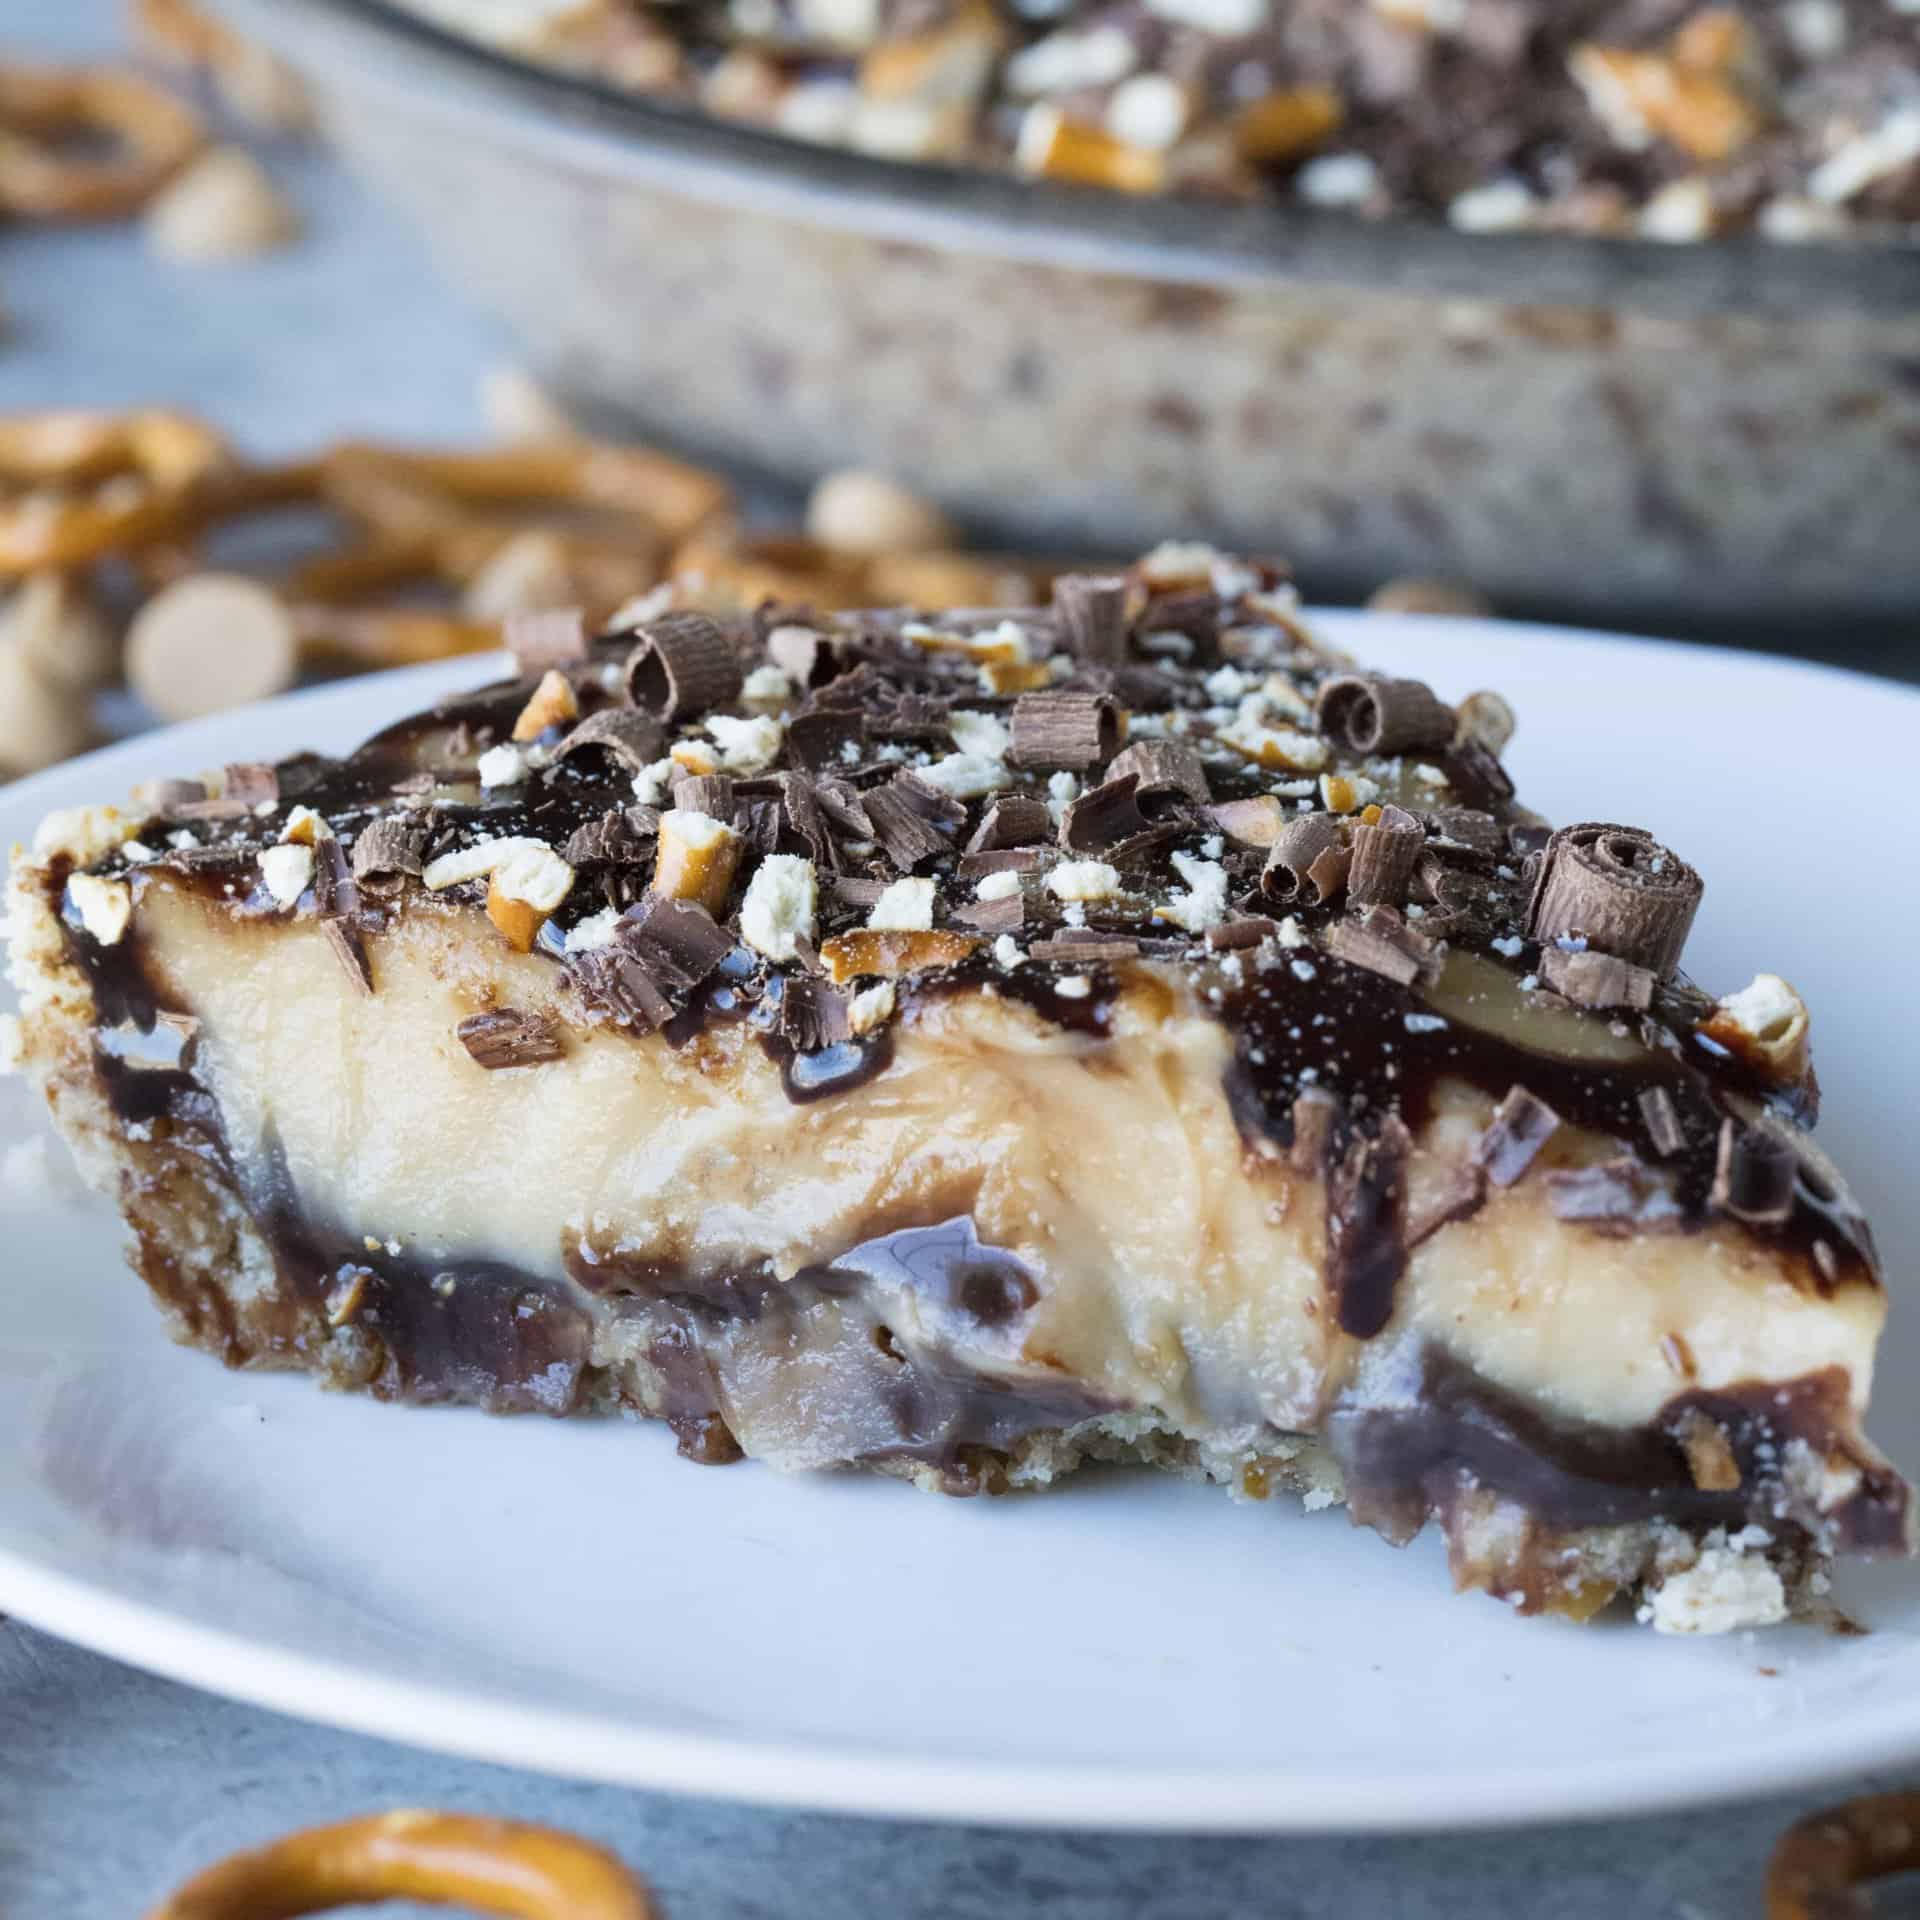 Get ready for a pie that will change your life! Peanut Butter Hot Fudge Pie with Pretzel Crust is sure to be a family favorite!